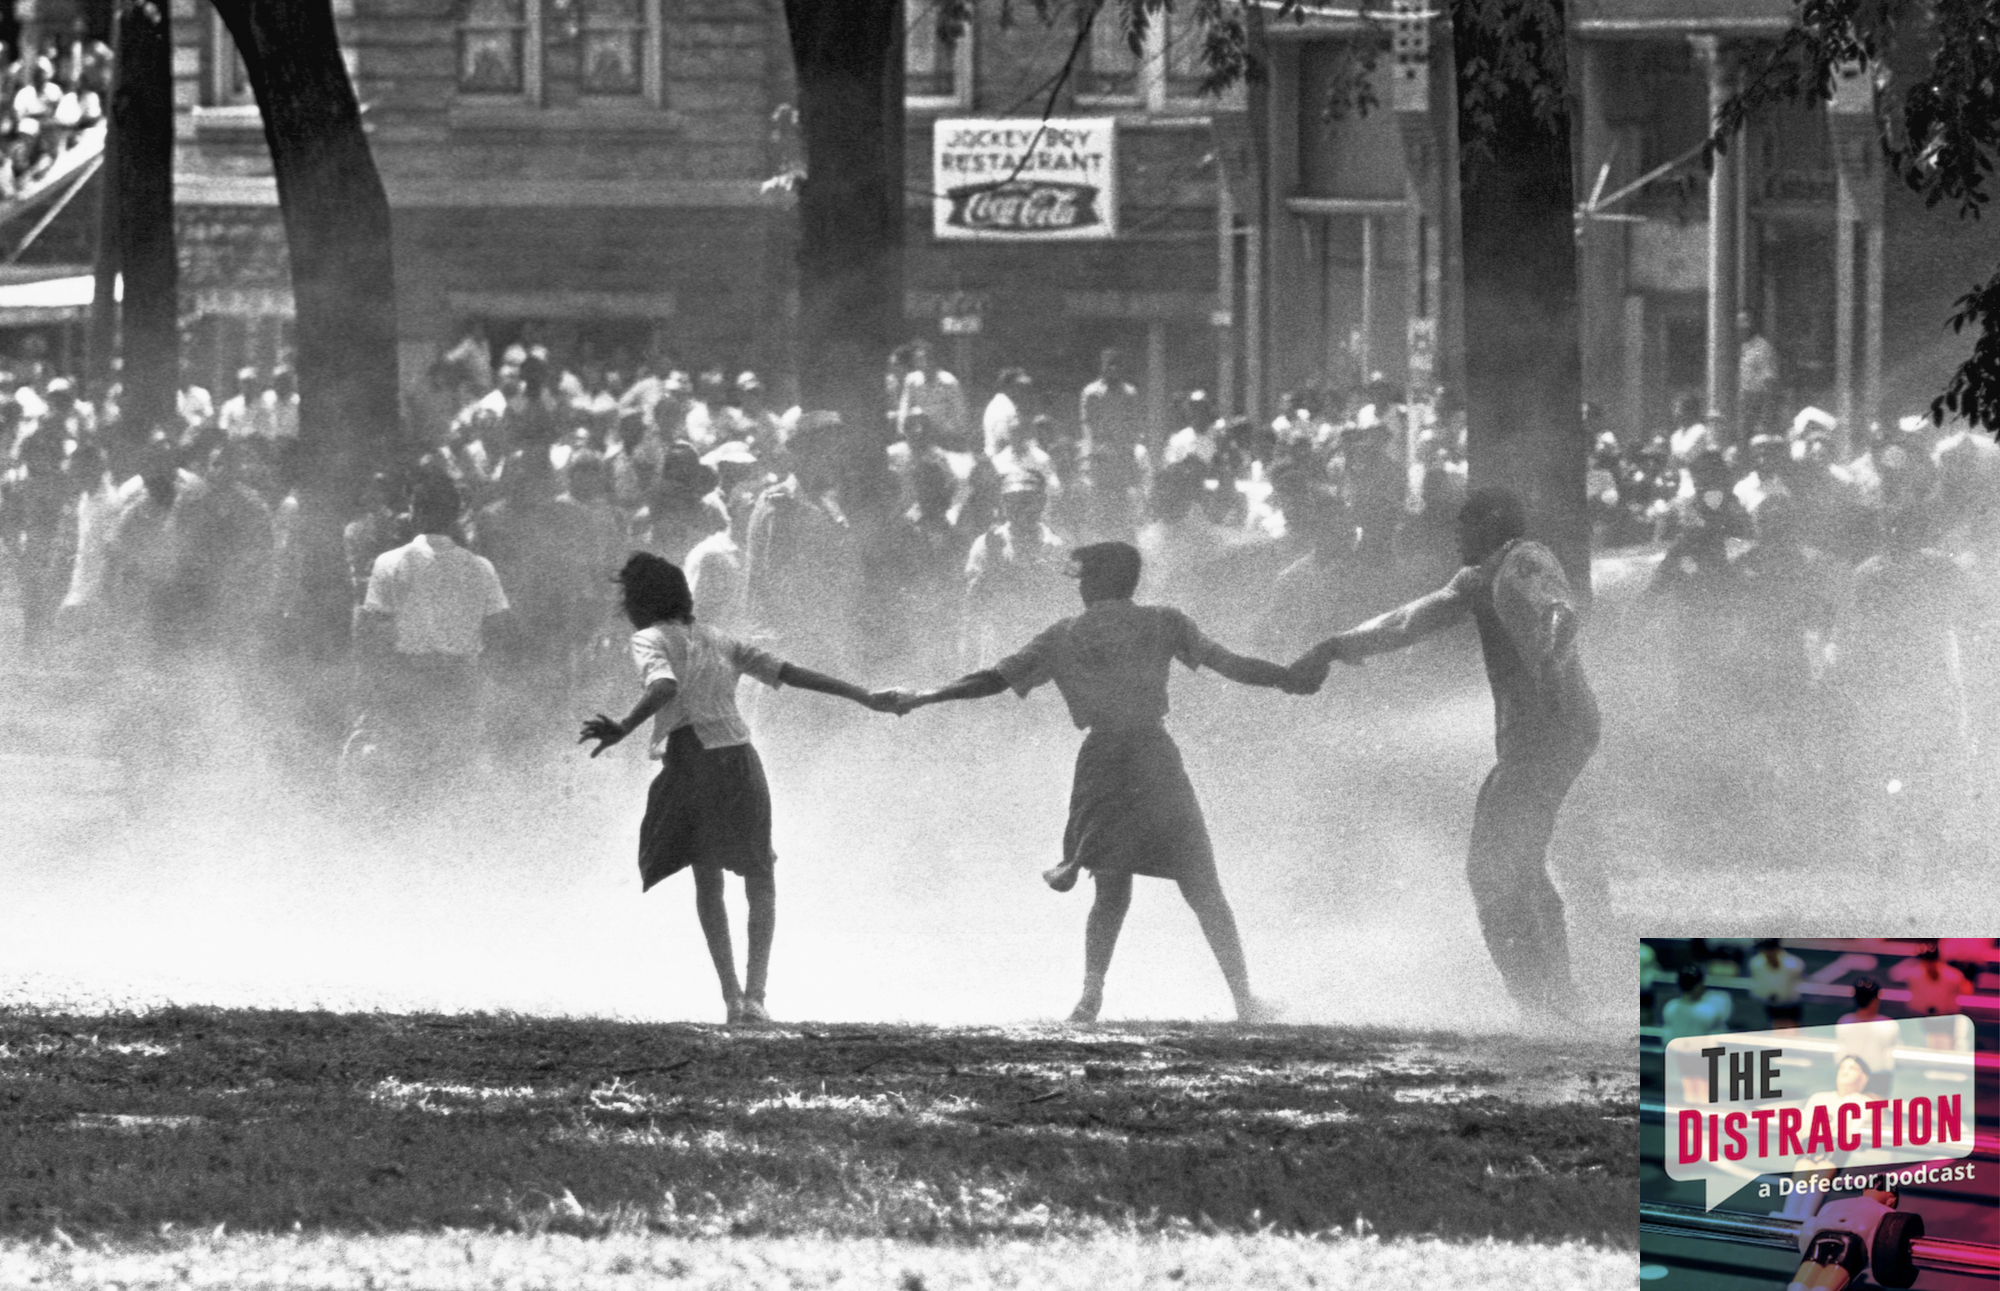 Three demonstrators join hands to build strength against the force of water sprayed by riot police in Birmingham, Alabama, during a protest of segregation practices.